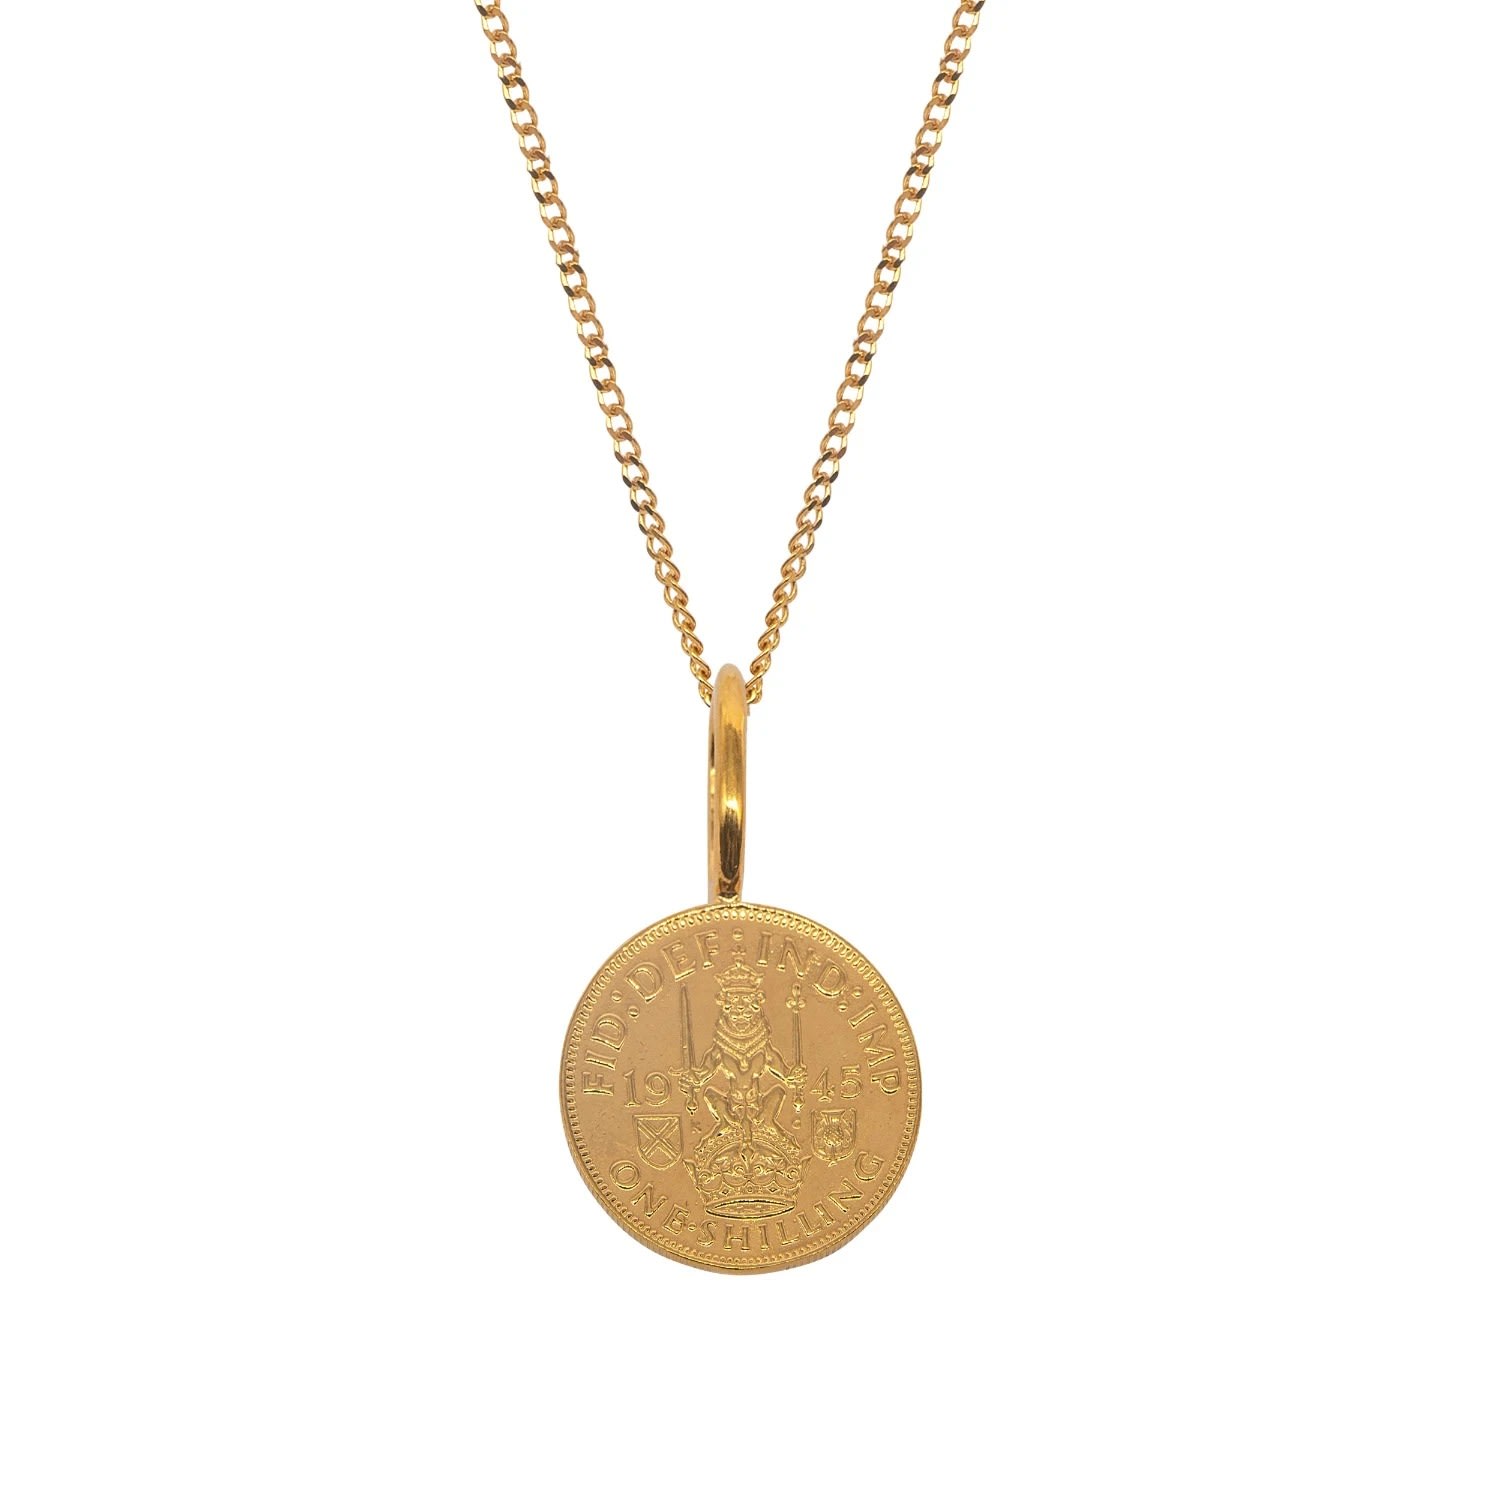 Men's Scottish Shilling Coin Charm & Chain In Gold Plated Katie Mullally